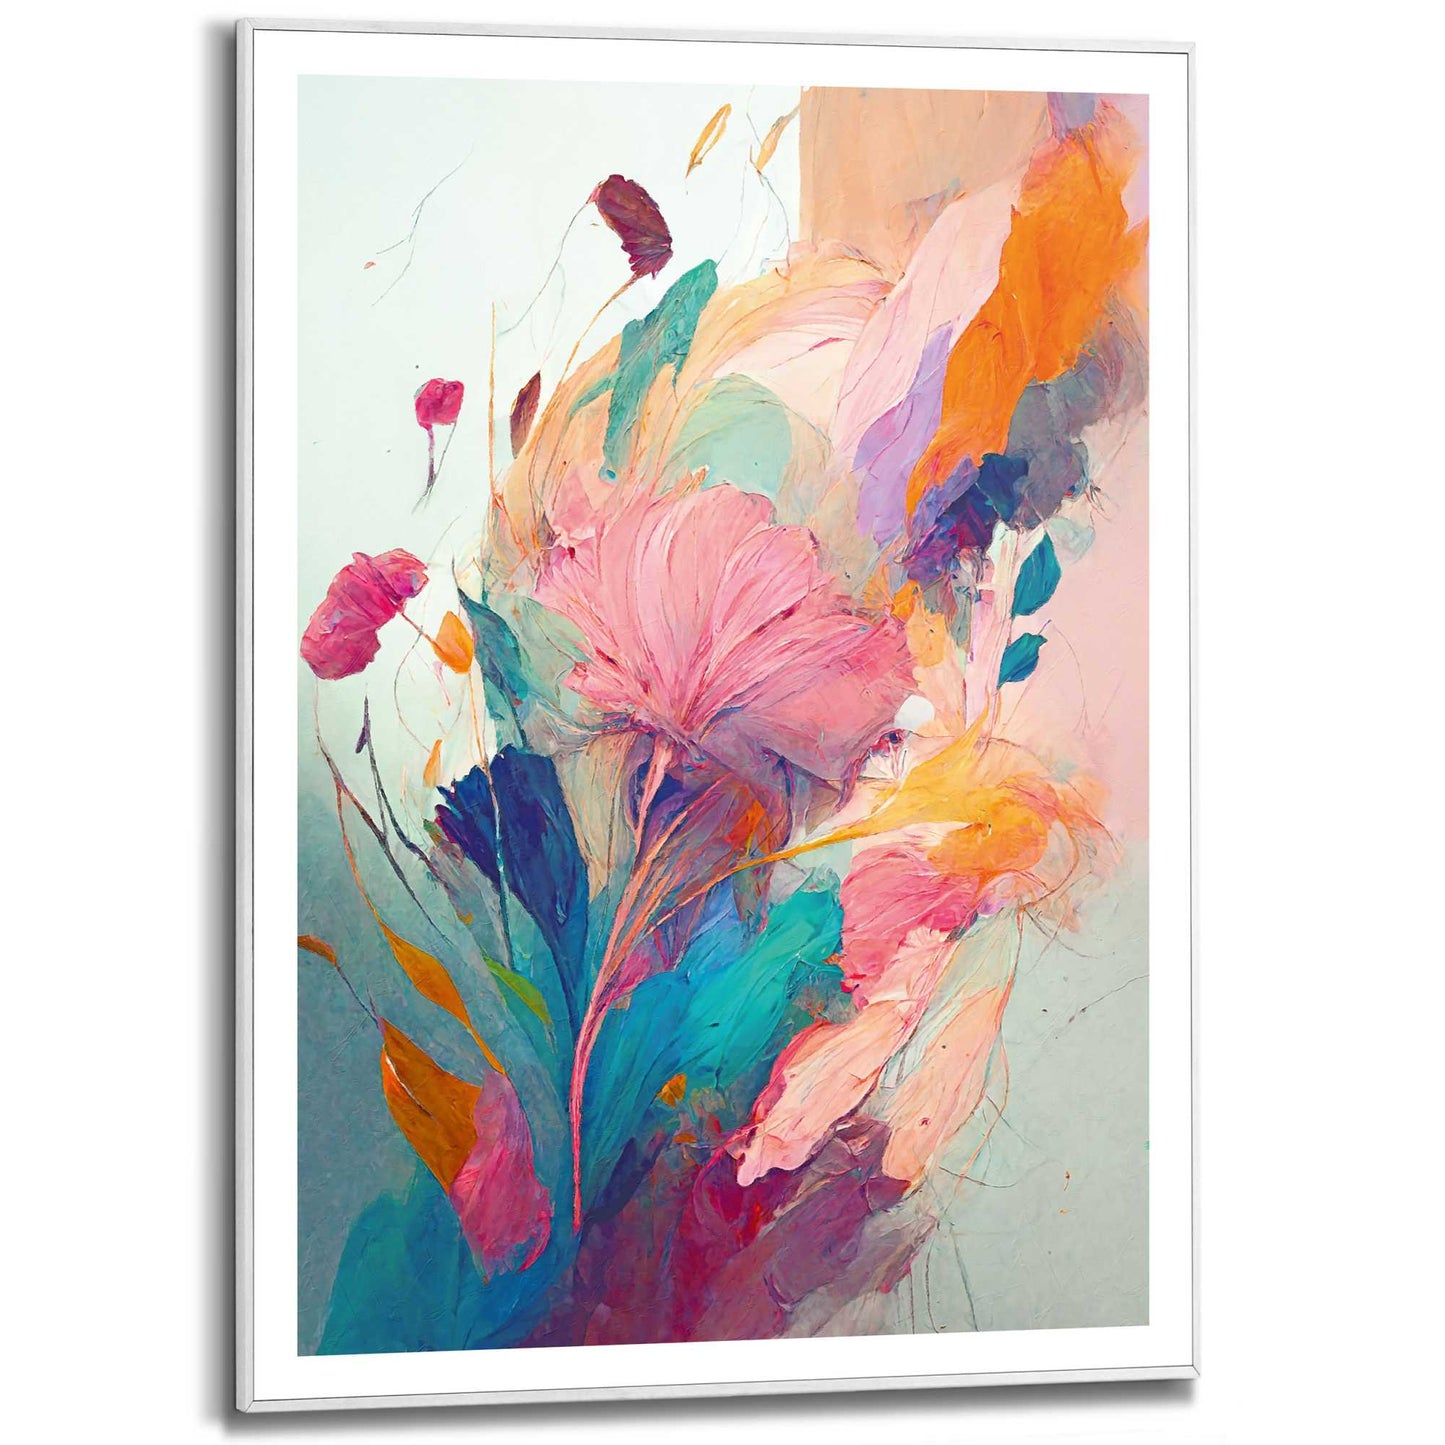 Framed in White Colourful Painted Flowers I 70x50